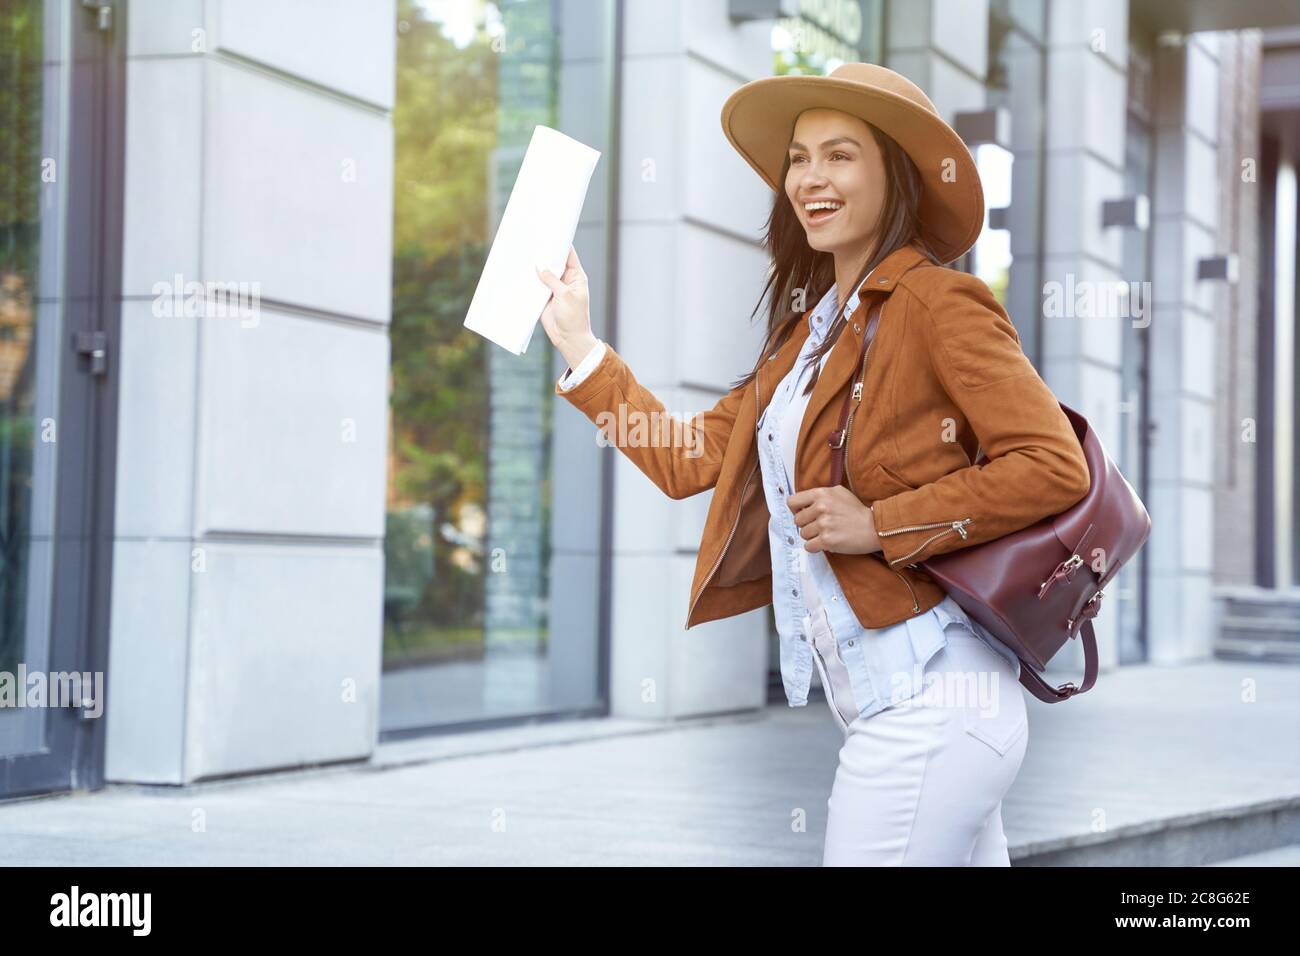 Travelling making us happy. Young and beautiful cheerful female traveler or tourist wearing hat and backpack holding map and smiling while walking on city street. Vacation, trip. Traveling and tourism Stock Photo